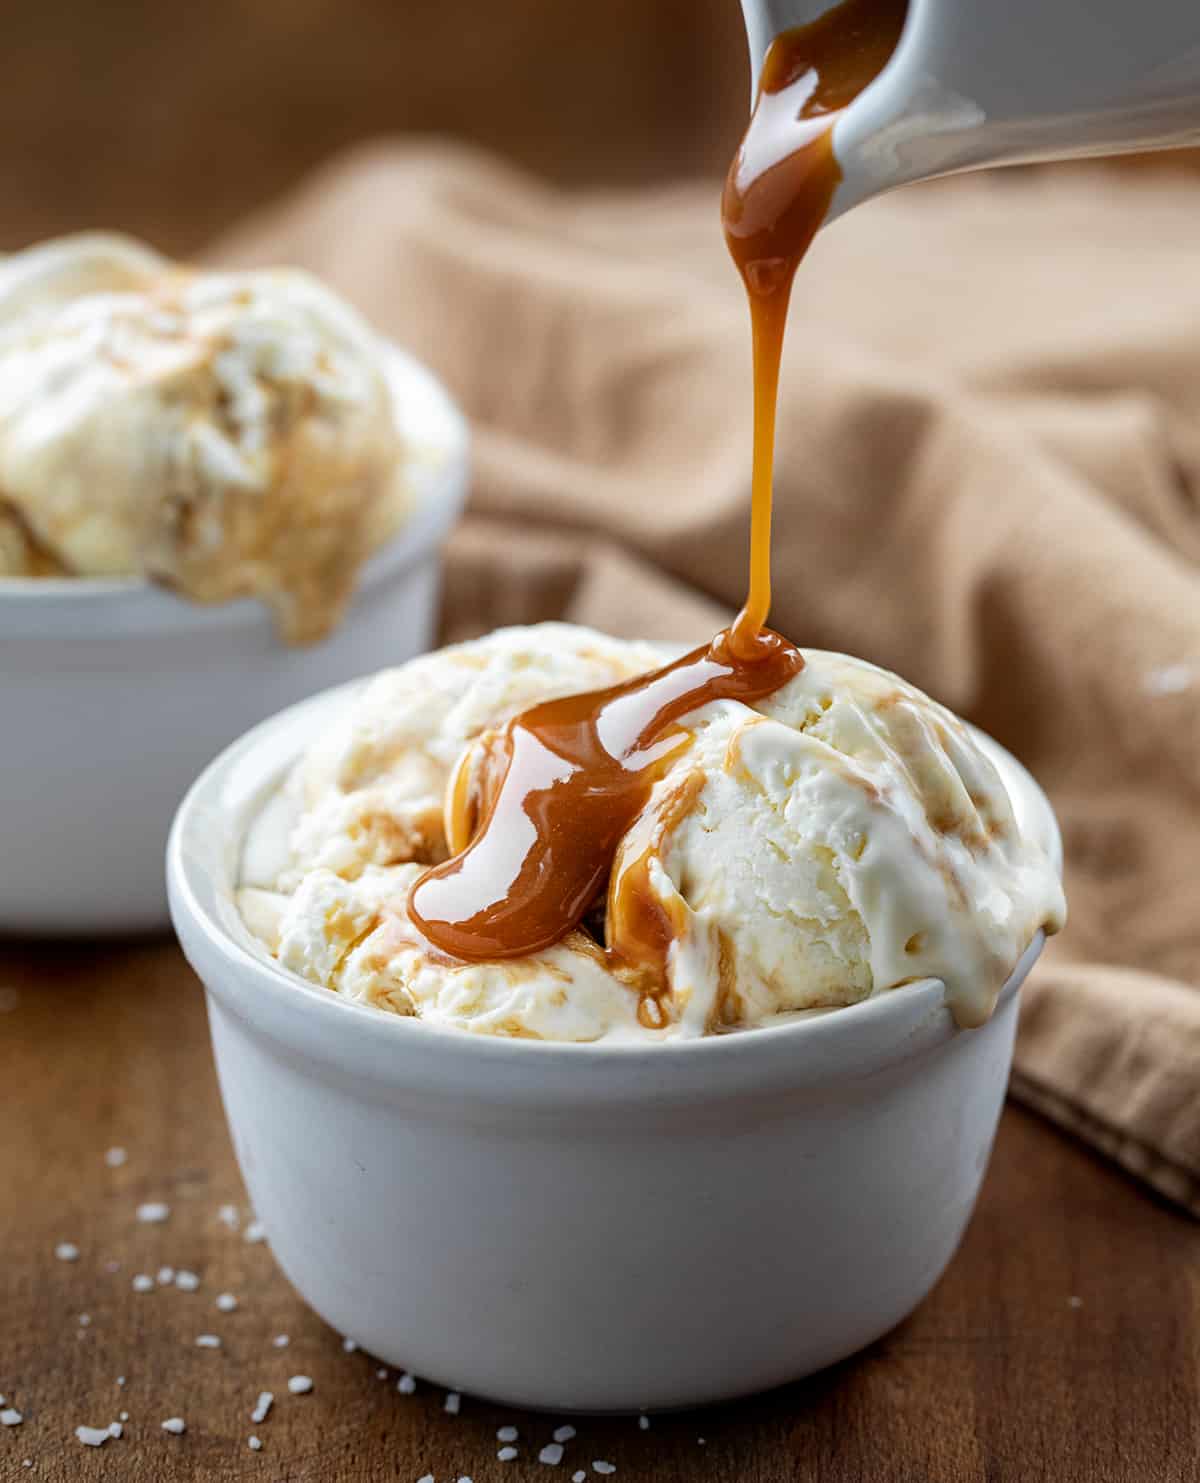 Pouring caramel over bowl of homemade No Churn Salted Caramel Ice Cream on a wooden table.